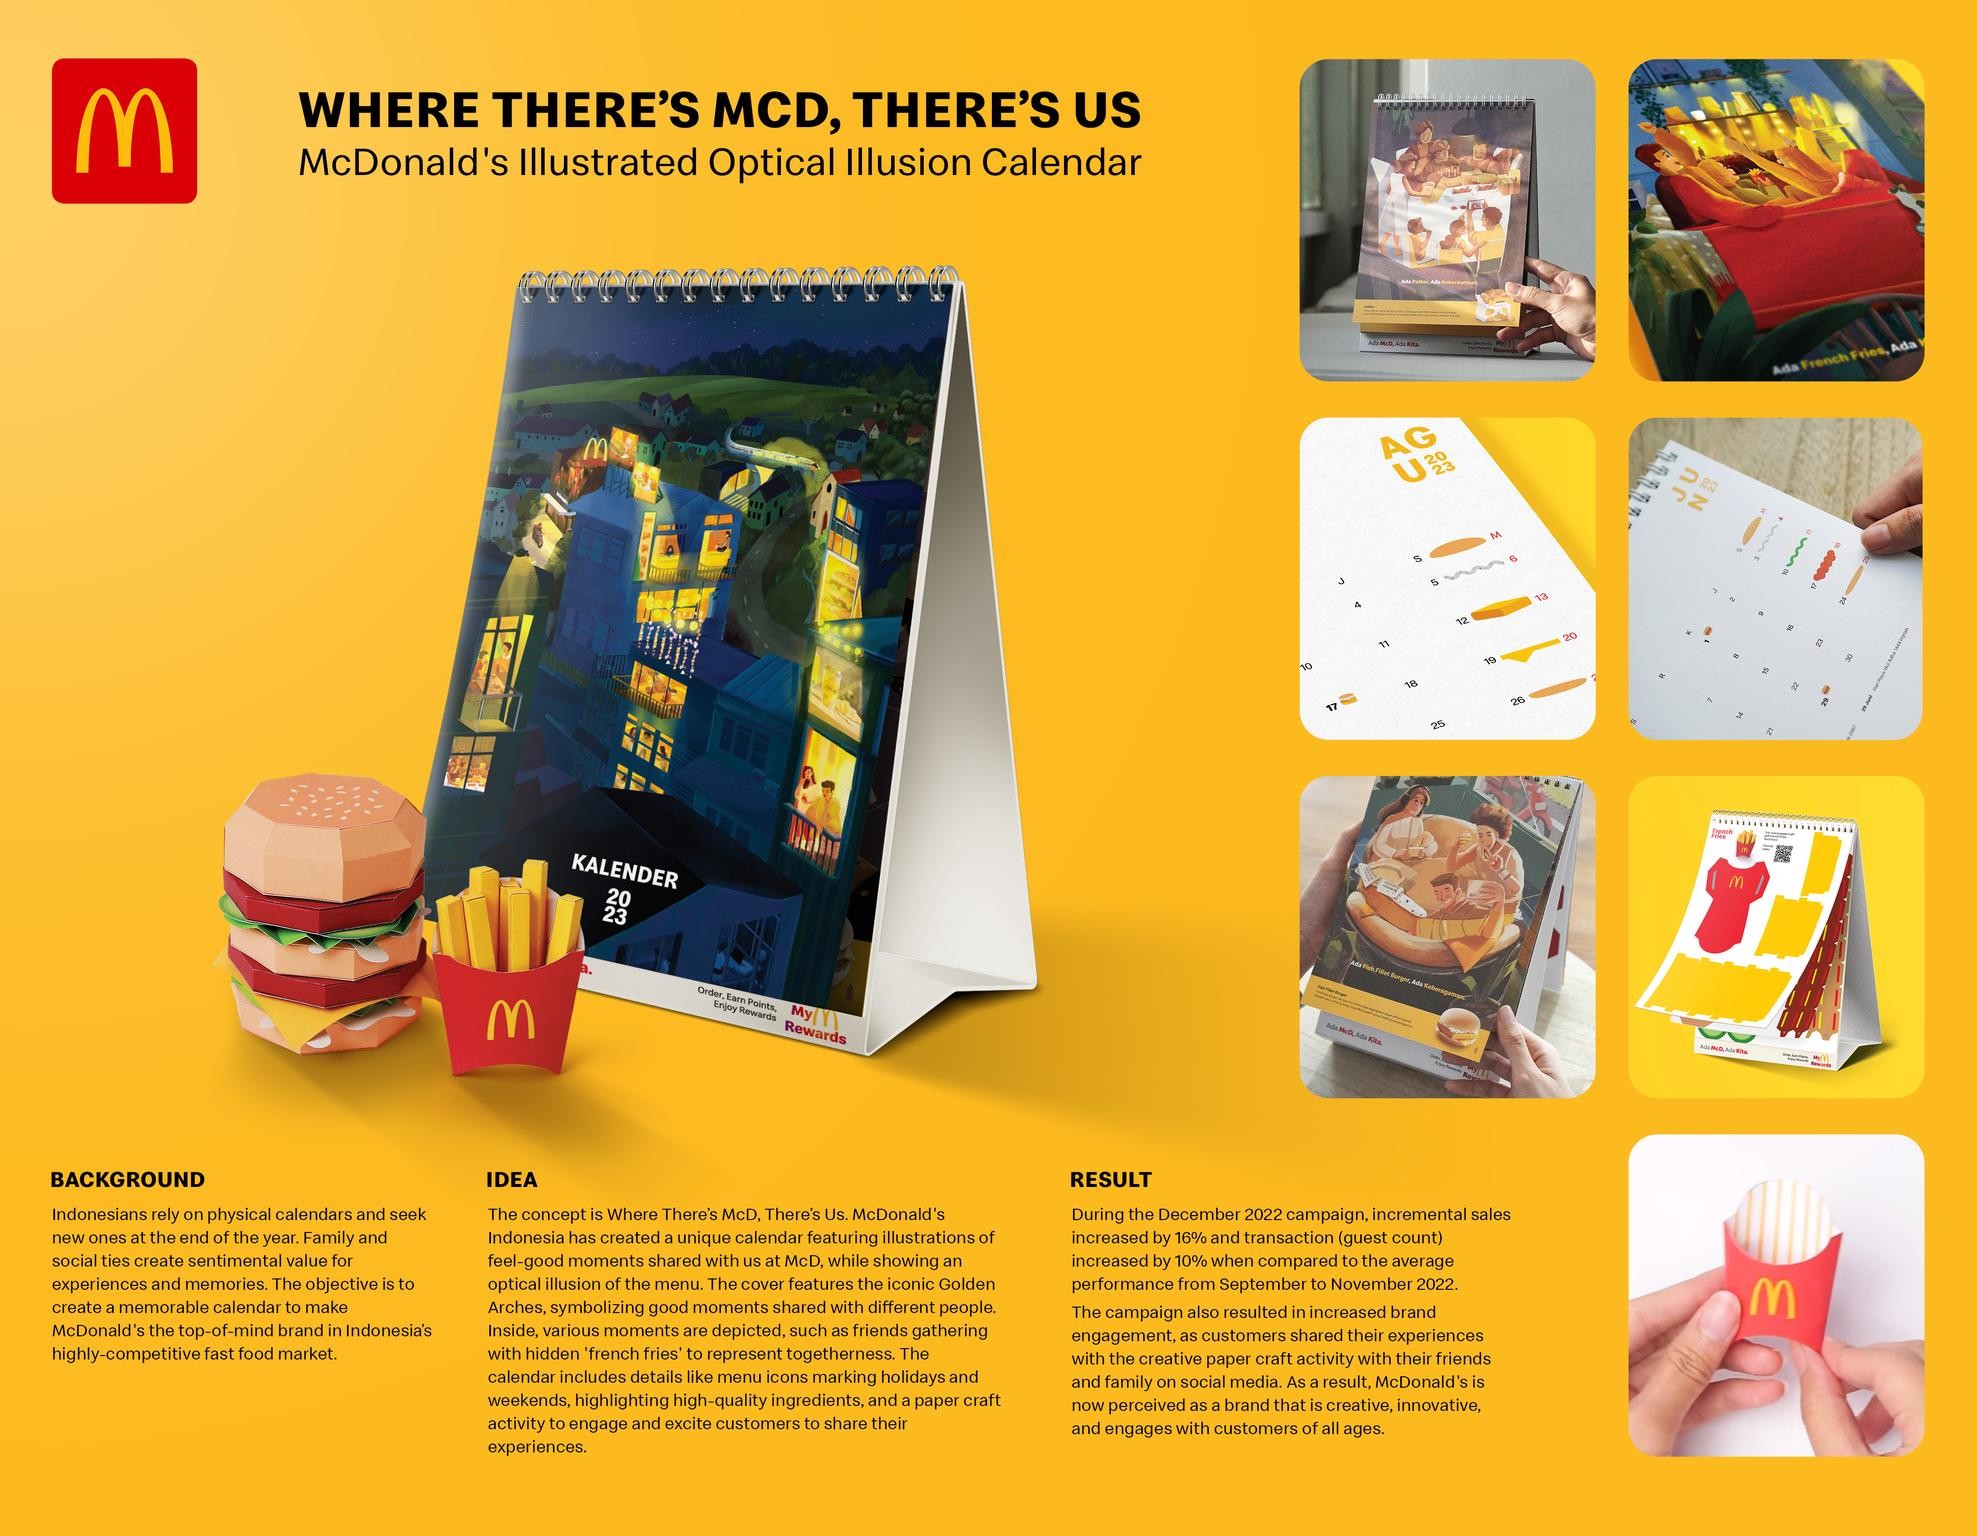 McDonald's Illustrated Optical Illusion Calendar - Where There's McD, There's Us